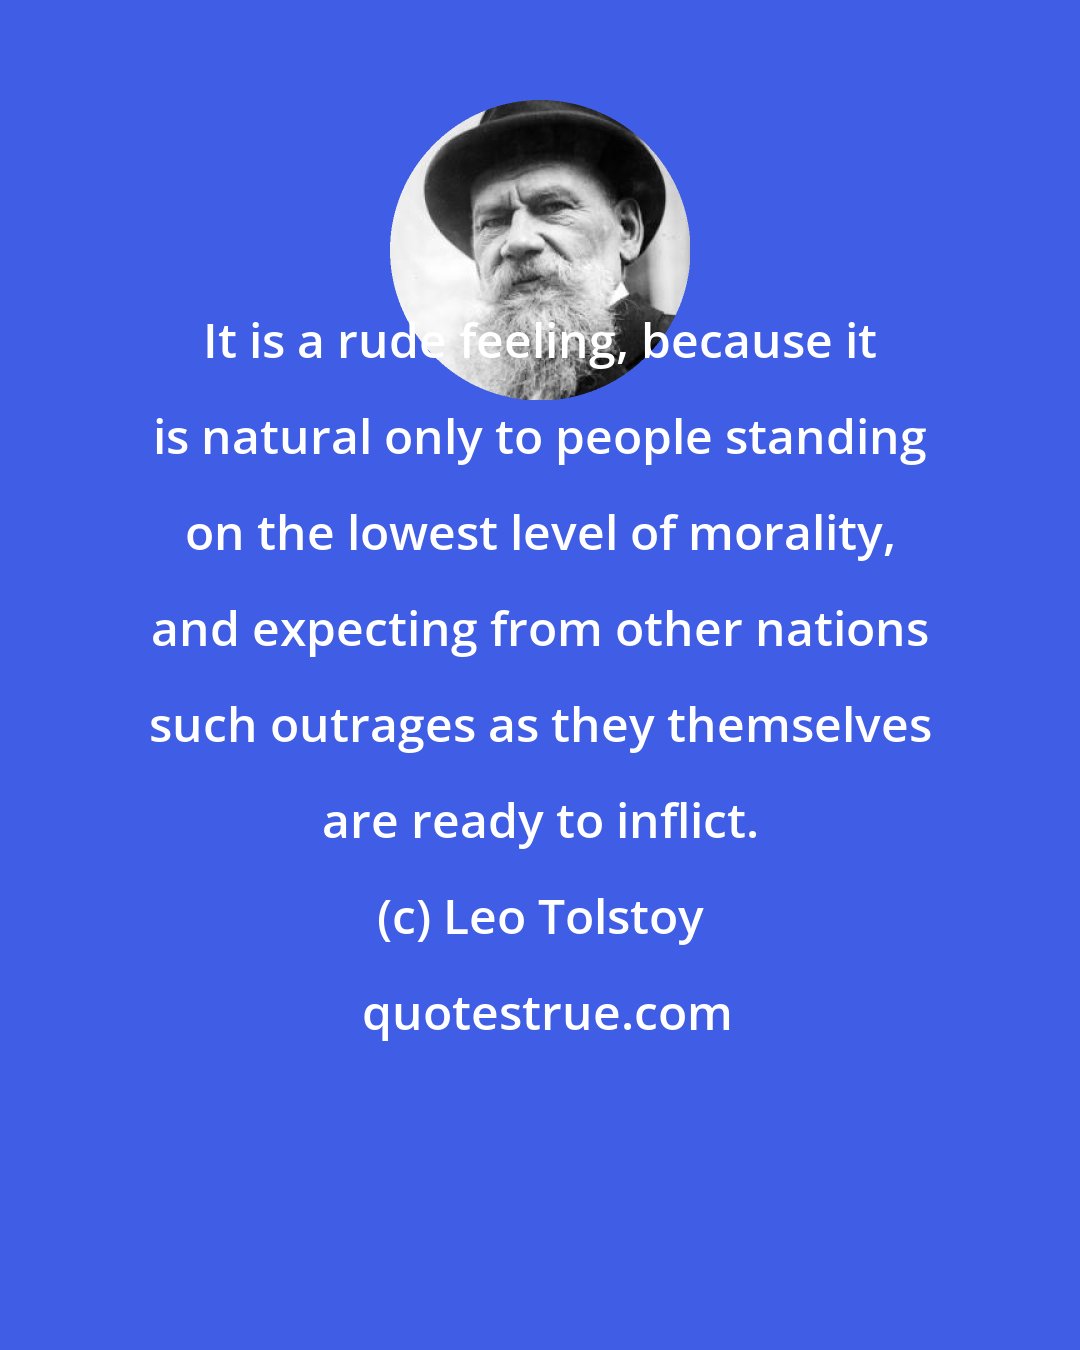 Leo Tolstoy: It is a rude feeling, because it is natural only to people standing on the lowest level of morality, and expecting from other nations such outrages as they themselves are ready to inflict.